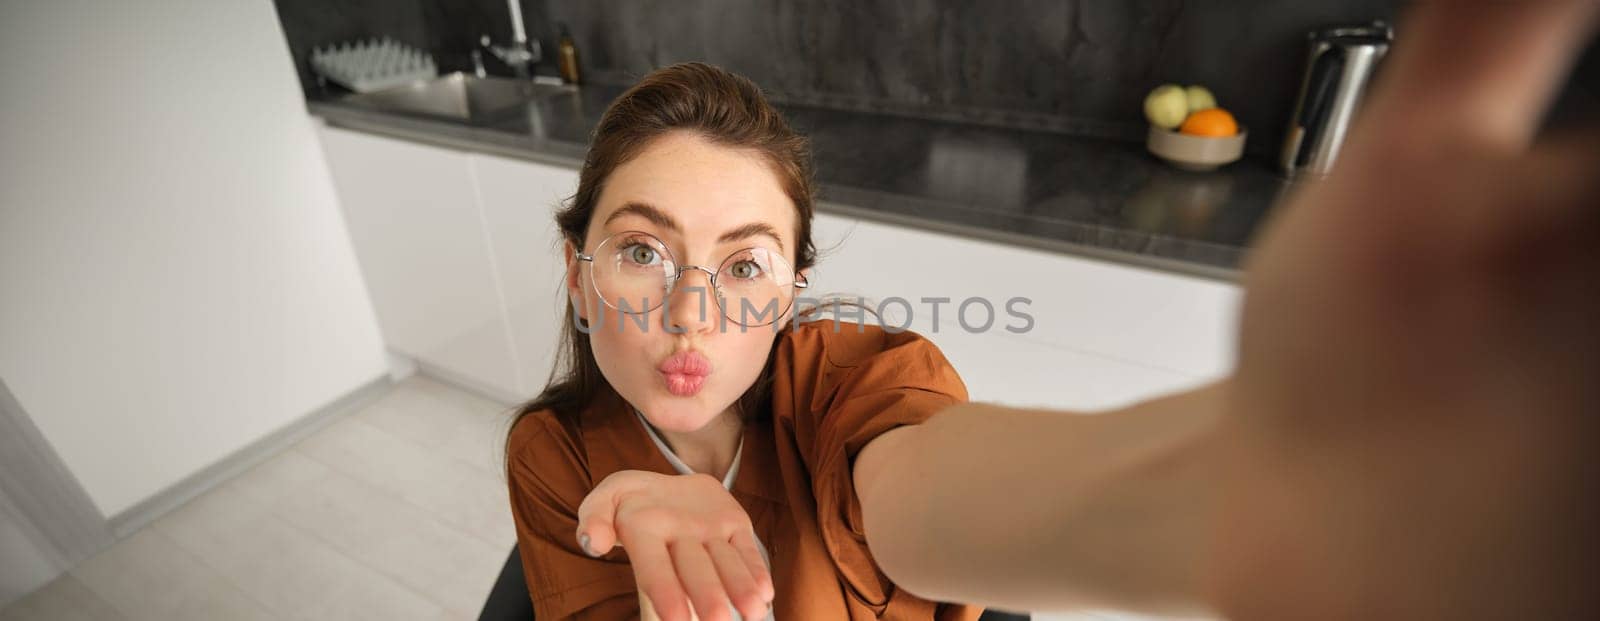 Selfie of happy young and carefree woman, taking photo on mobile phone with extended hand, posing and smiling, sitting in kitchen in glasses.